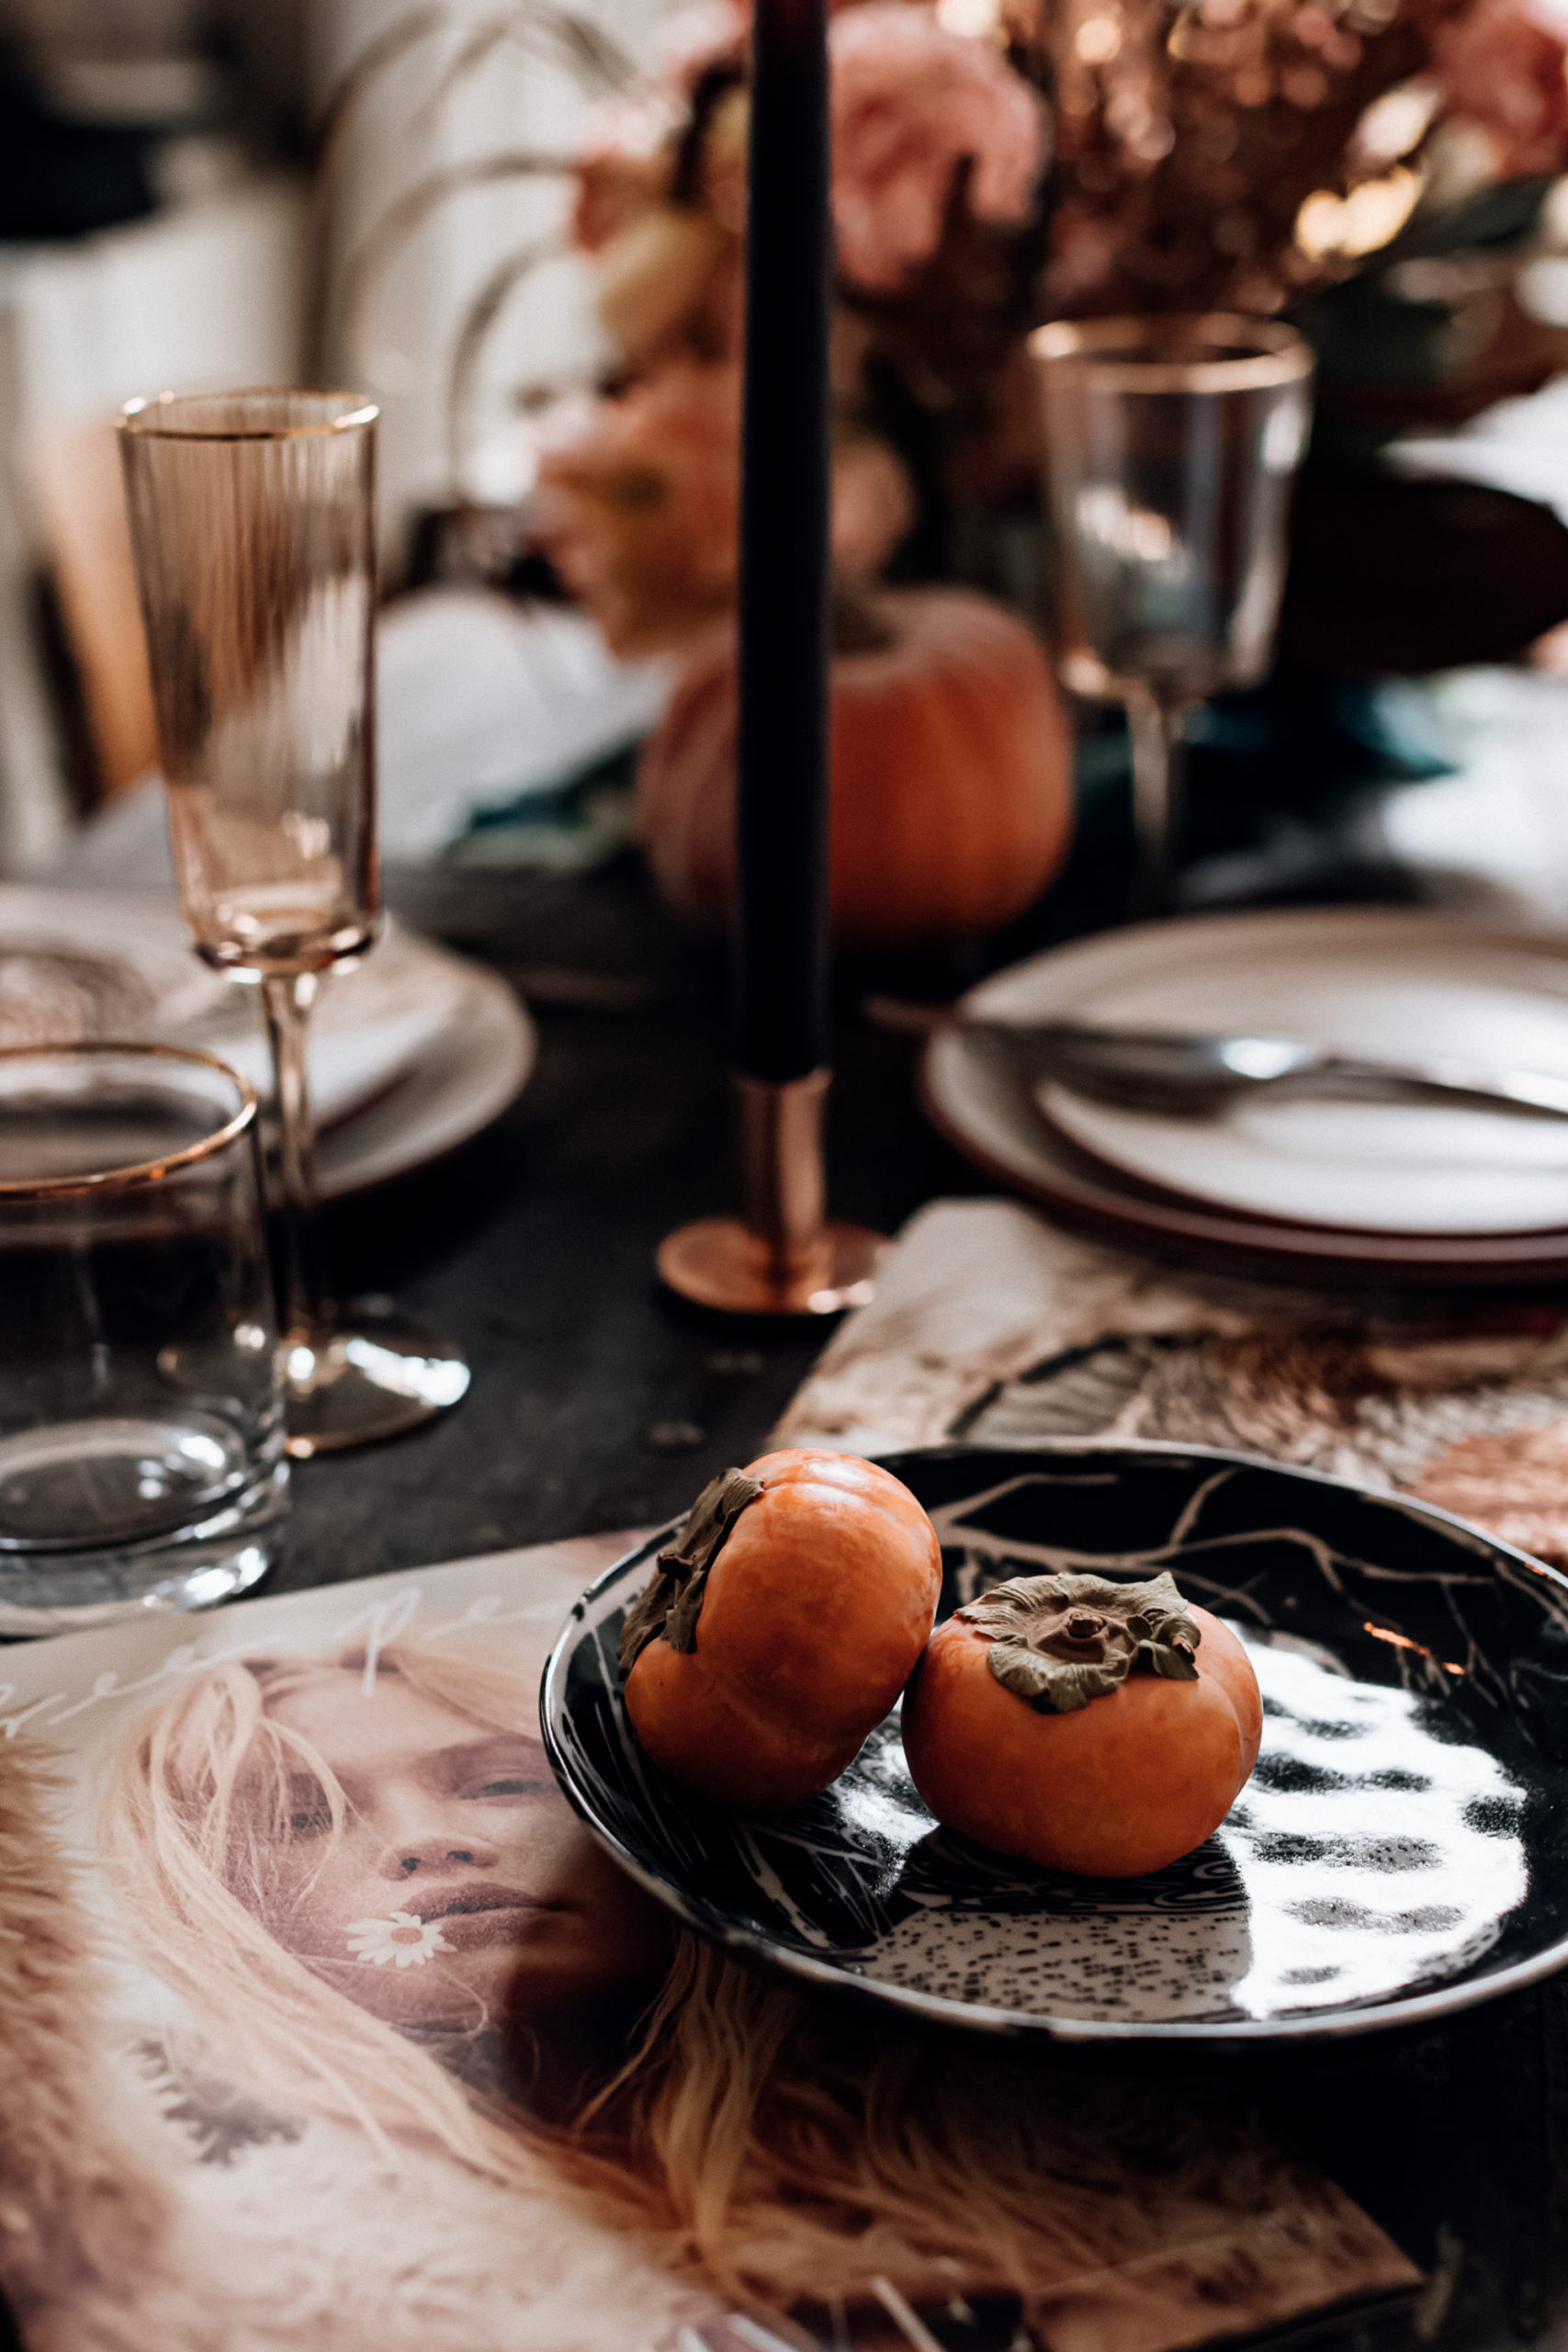 https://christiannkoepke.com/2019/11/19/how-to-decorate-a-thanksgiving-table/how-to-decorate-a-thanksgiving-table-photography-creative-direction-by-christiann-koepke_-8/